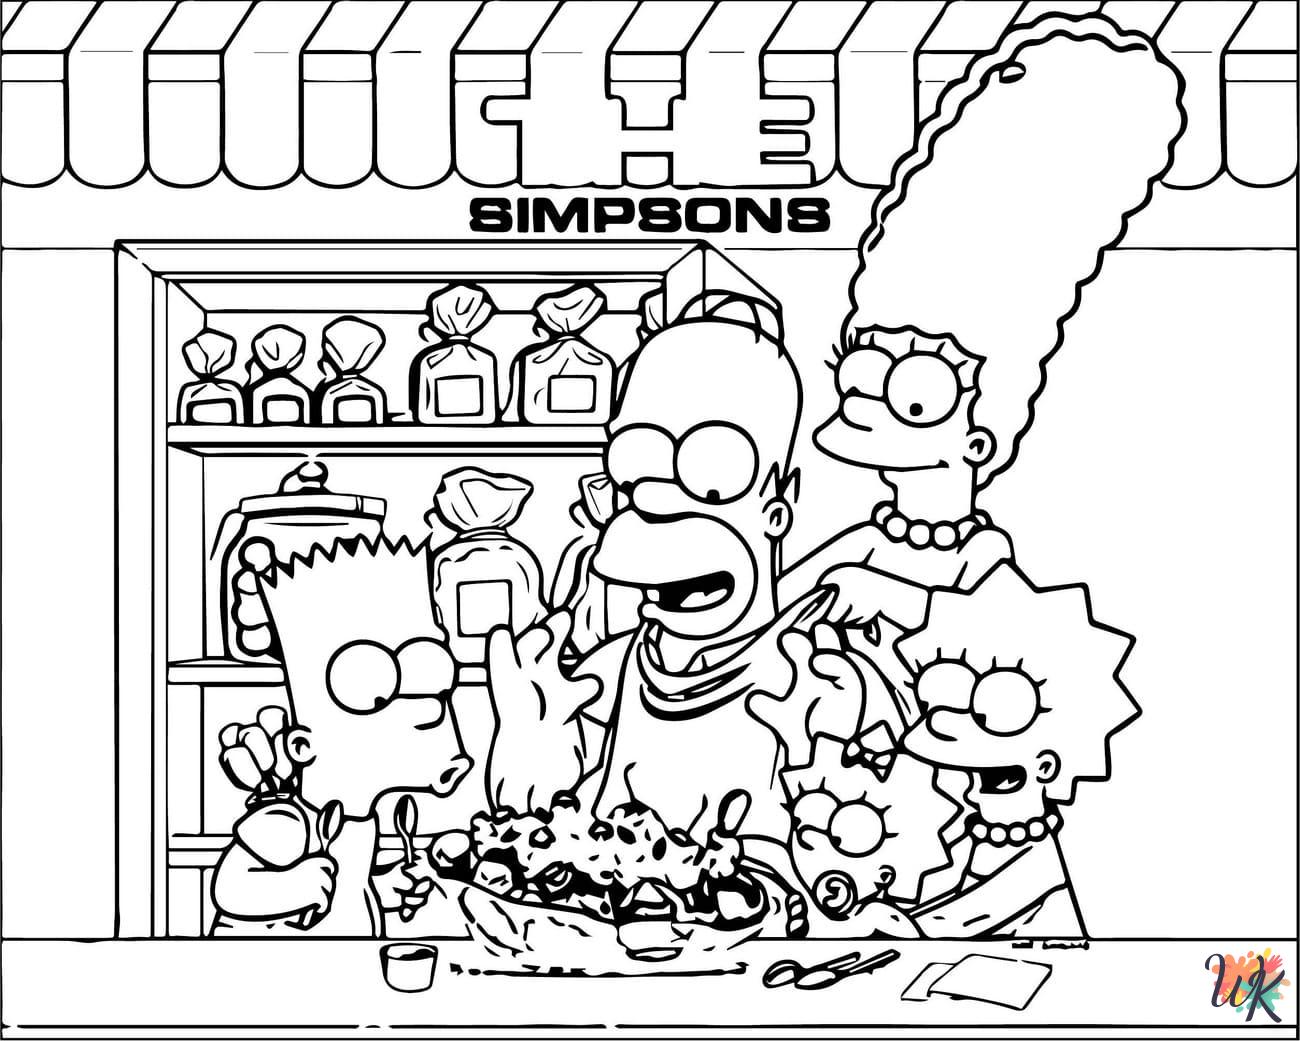 The Simpsons coloring pages for adults